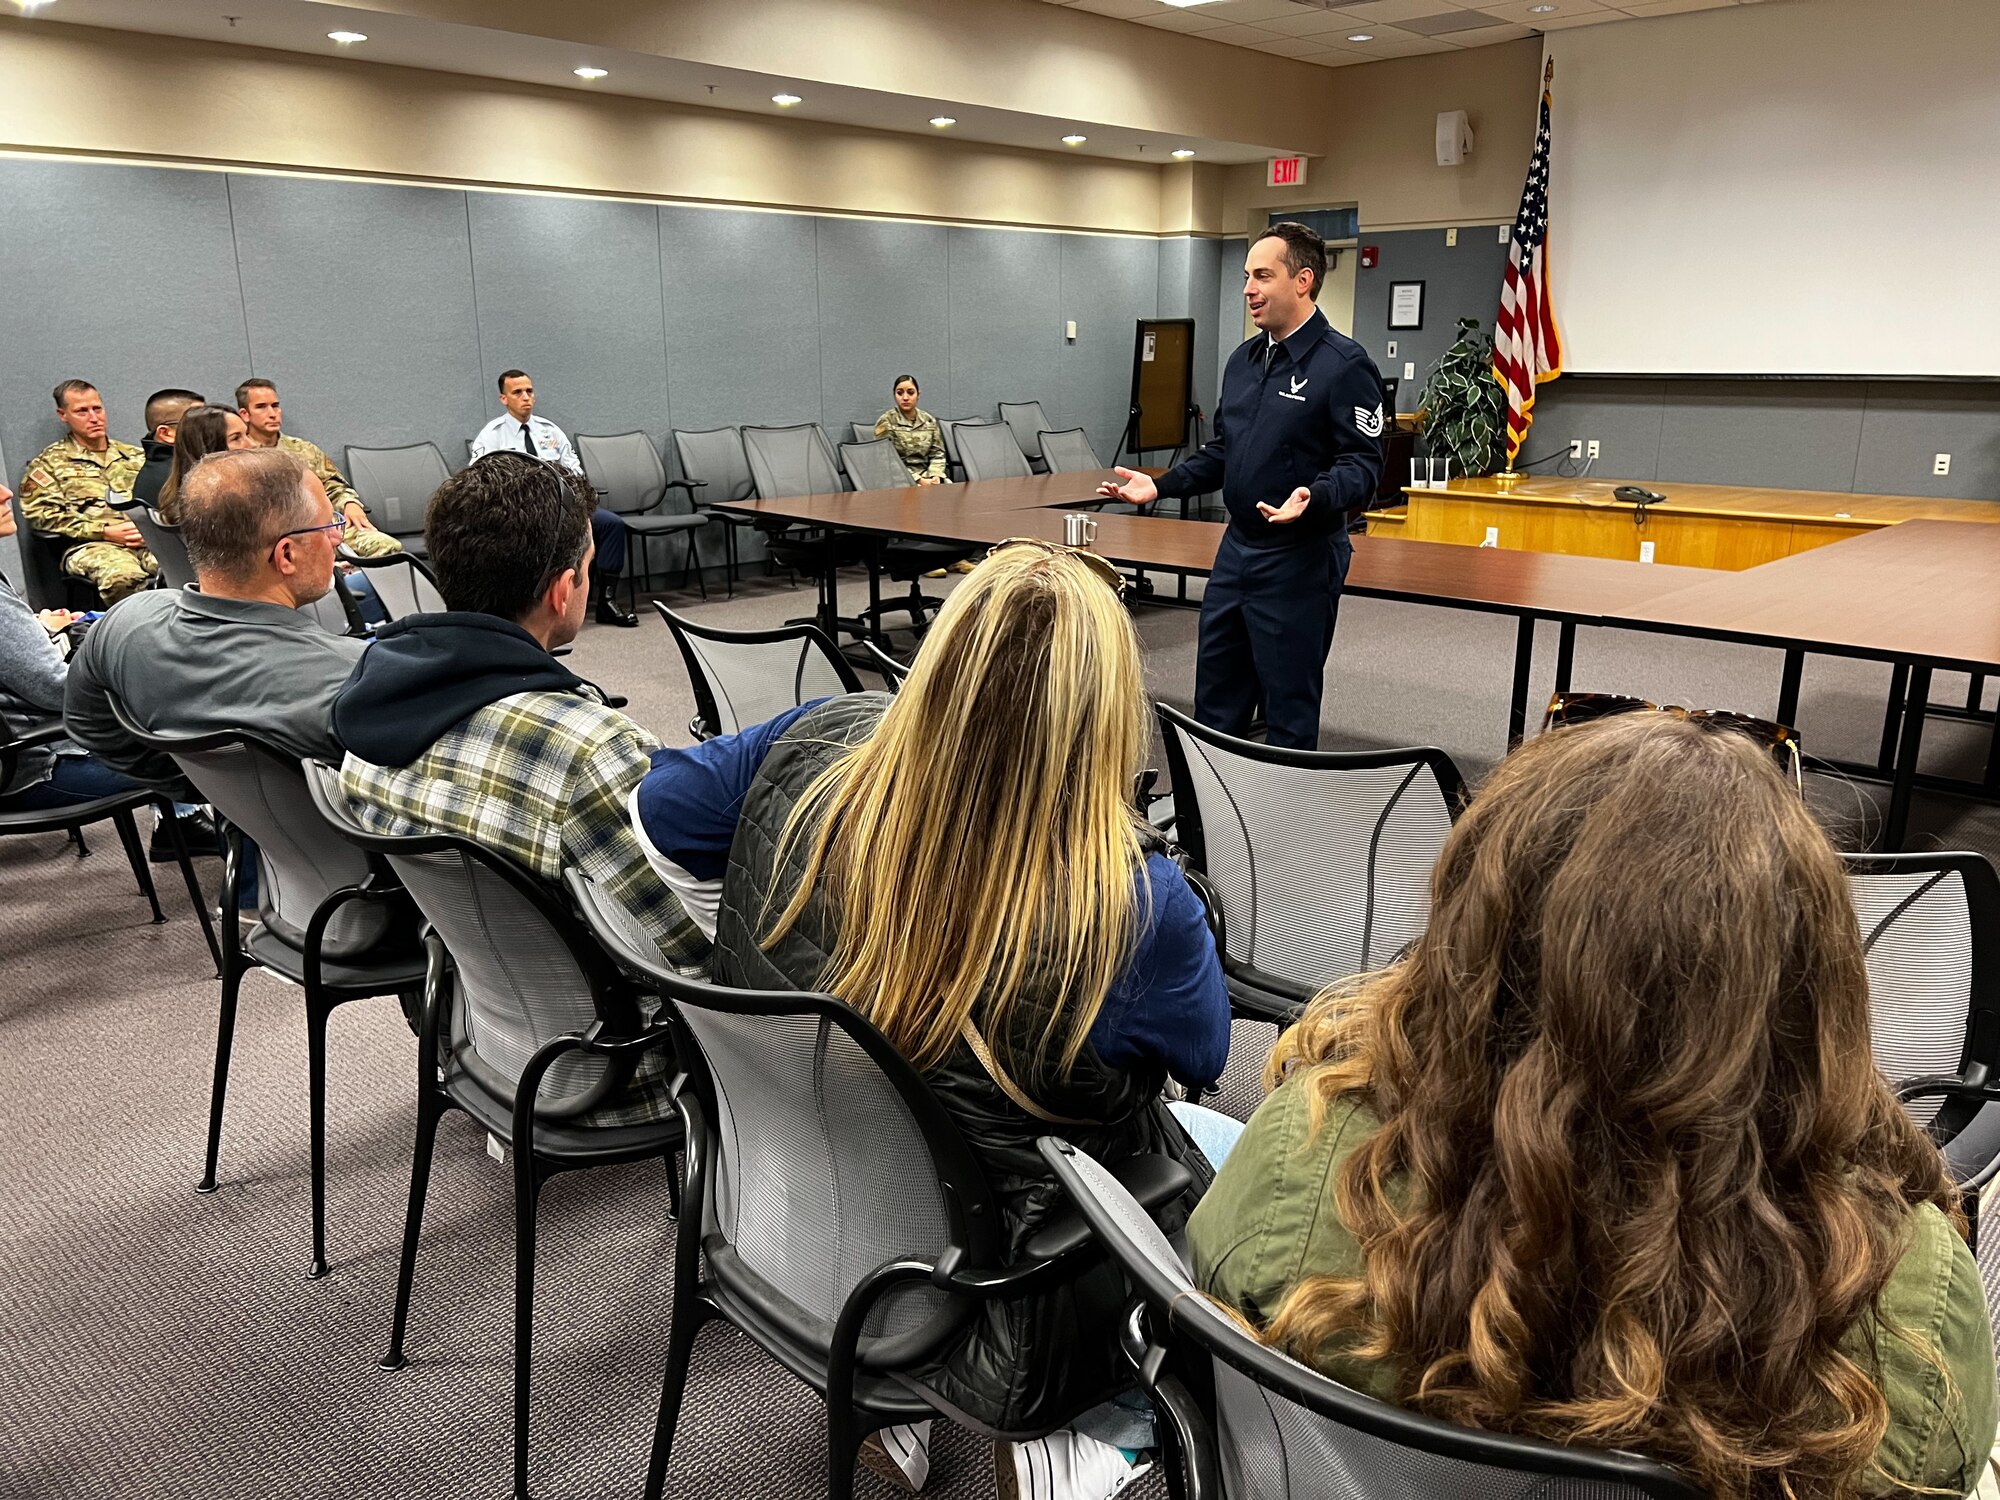 U.S. Air Force Tech Sgt. Joe Cacoperdo, Air National Guard recruiter, briefs a group of local high school guidance counselors about the mission and benefits of serving with the 106th Rescue Wing.